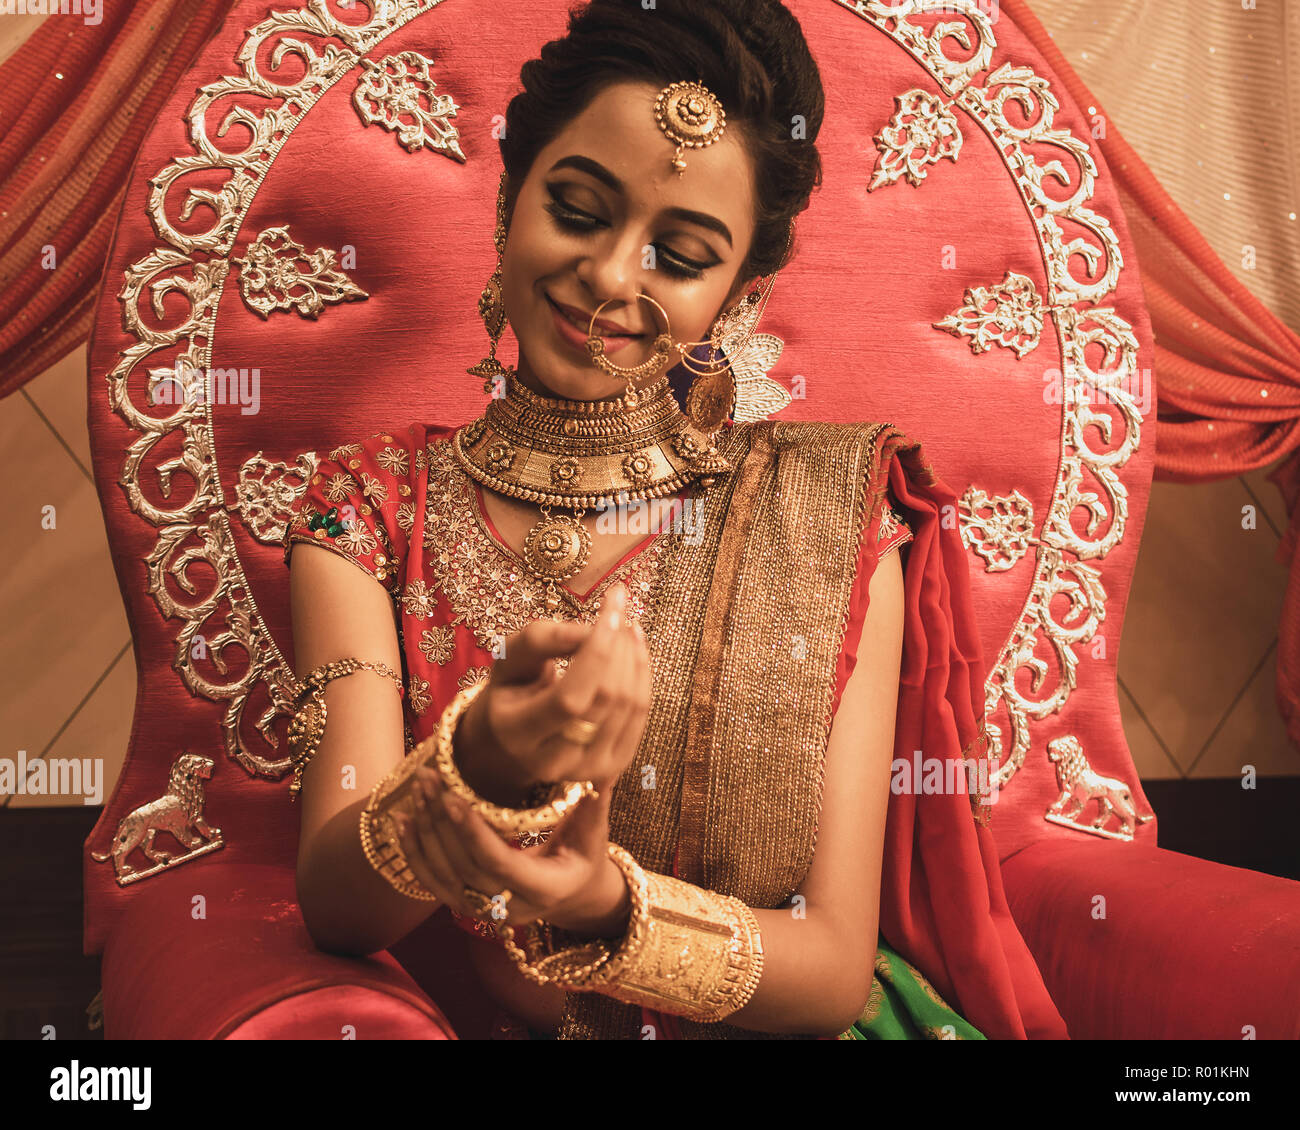 The Indian Bride and Her Beautiful Dresses | by Dr. Preeti Singh | Genius  in a Bottle | Medium